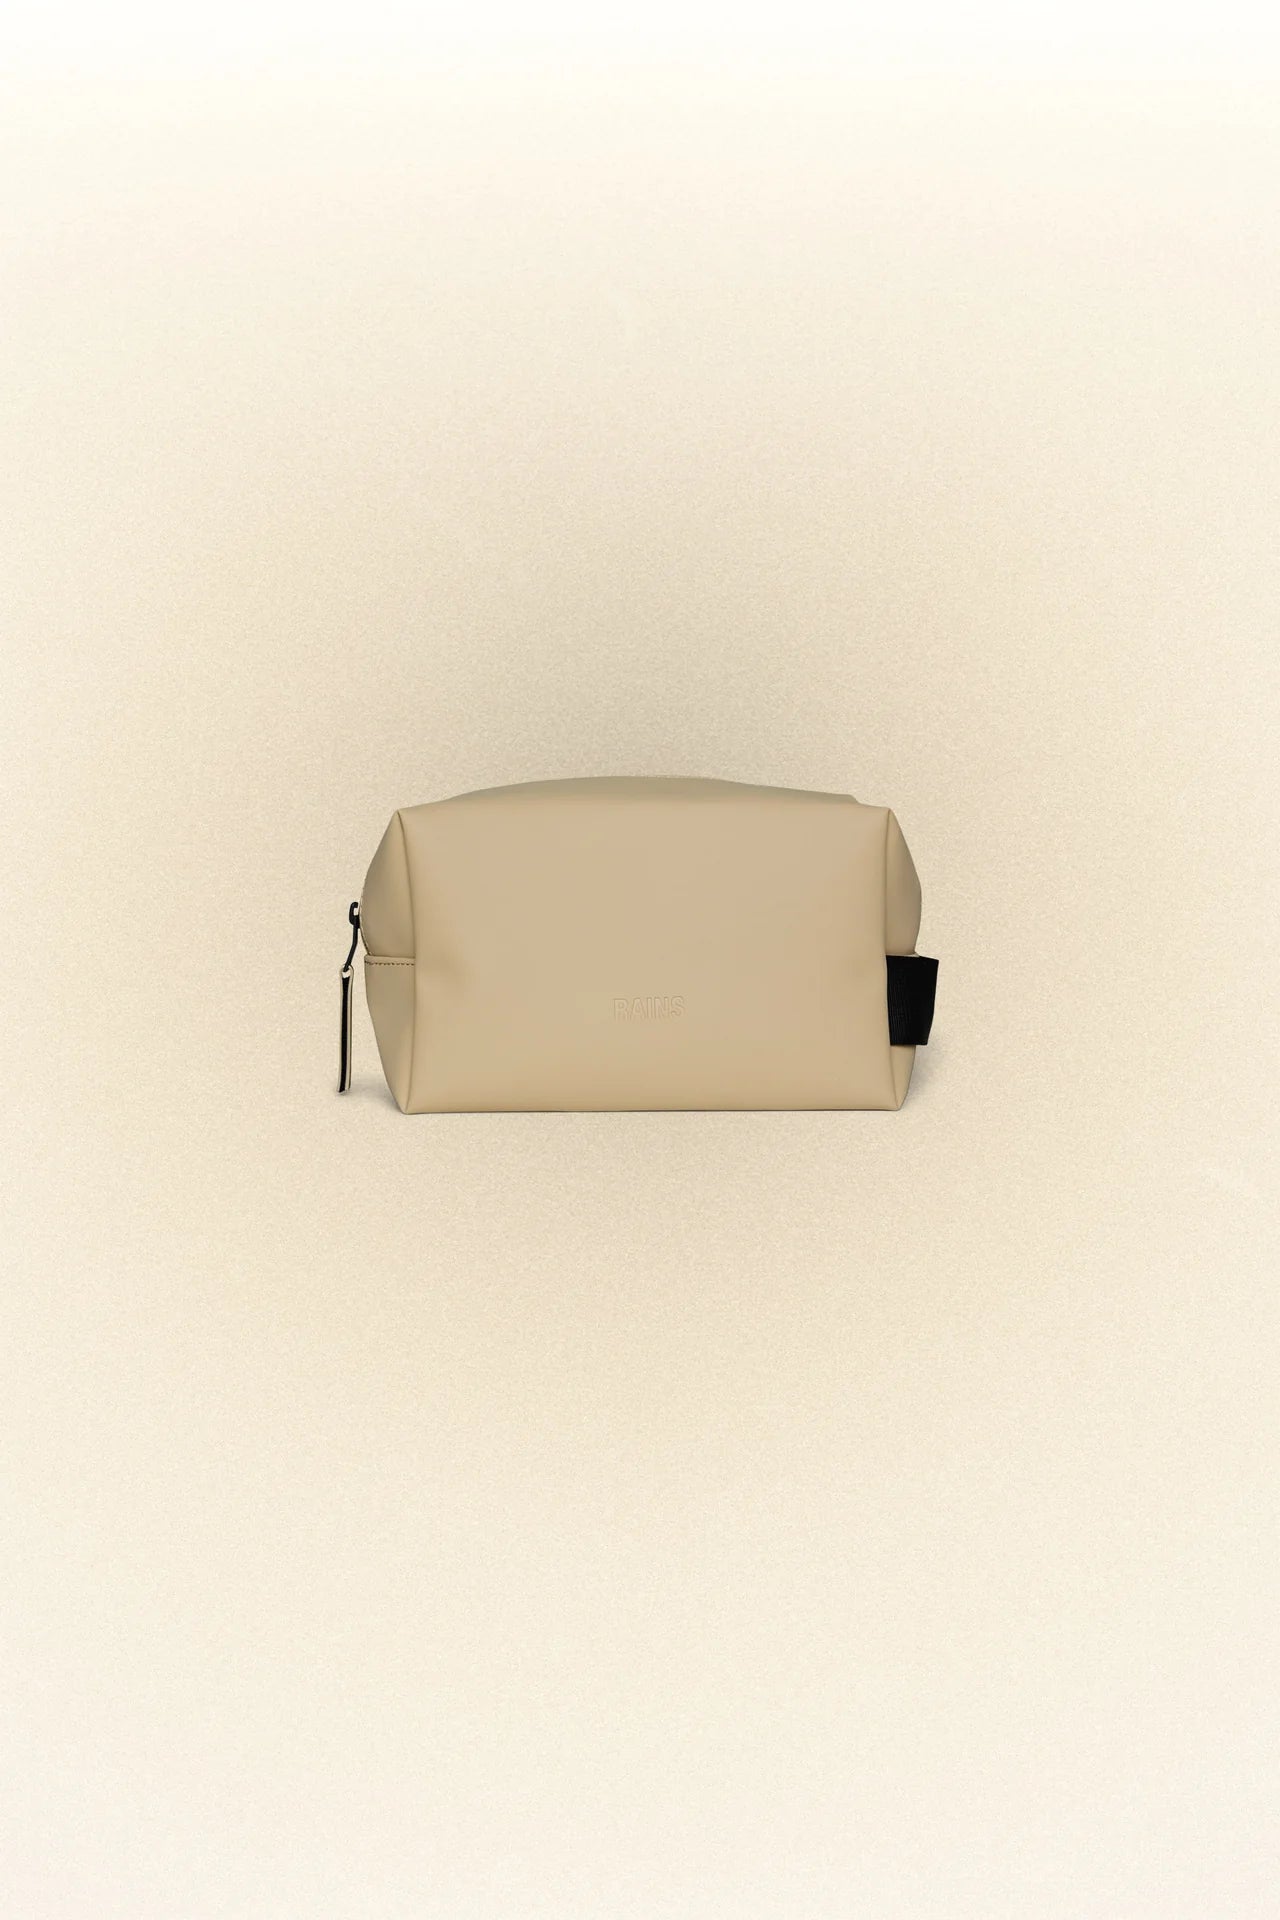 A Wash Bag Small by Rains on a white background.